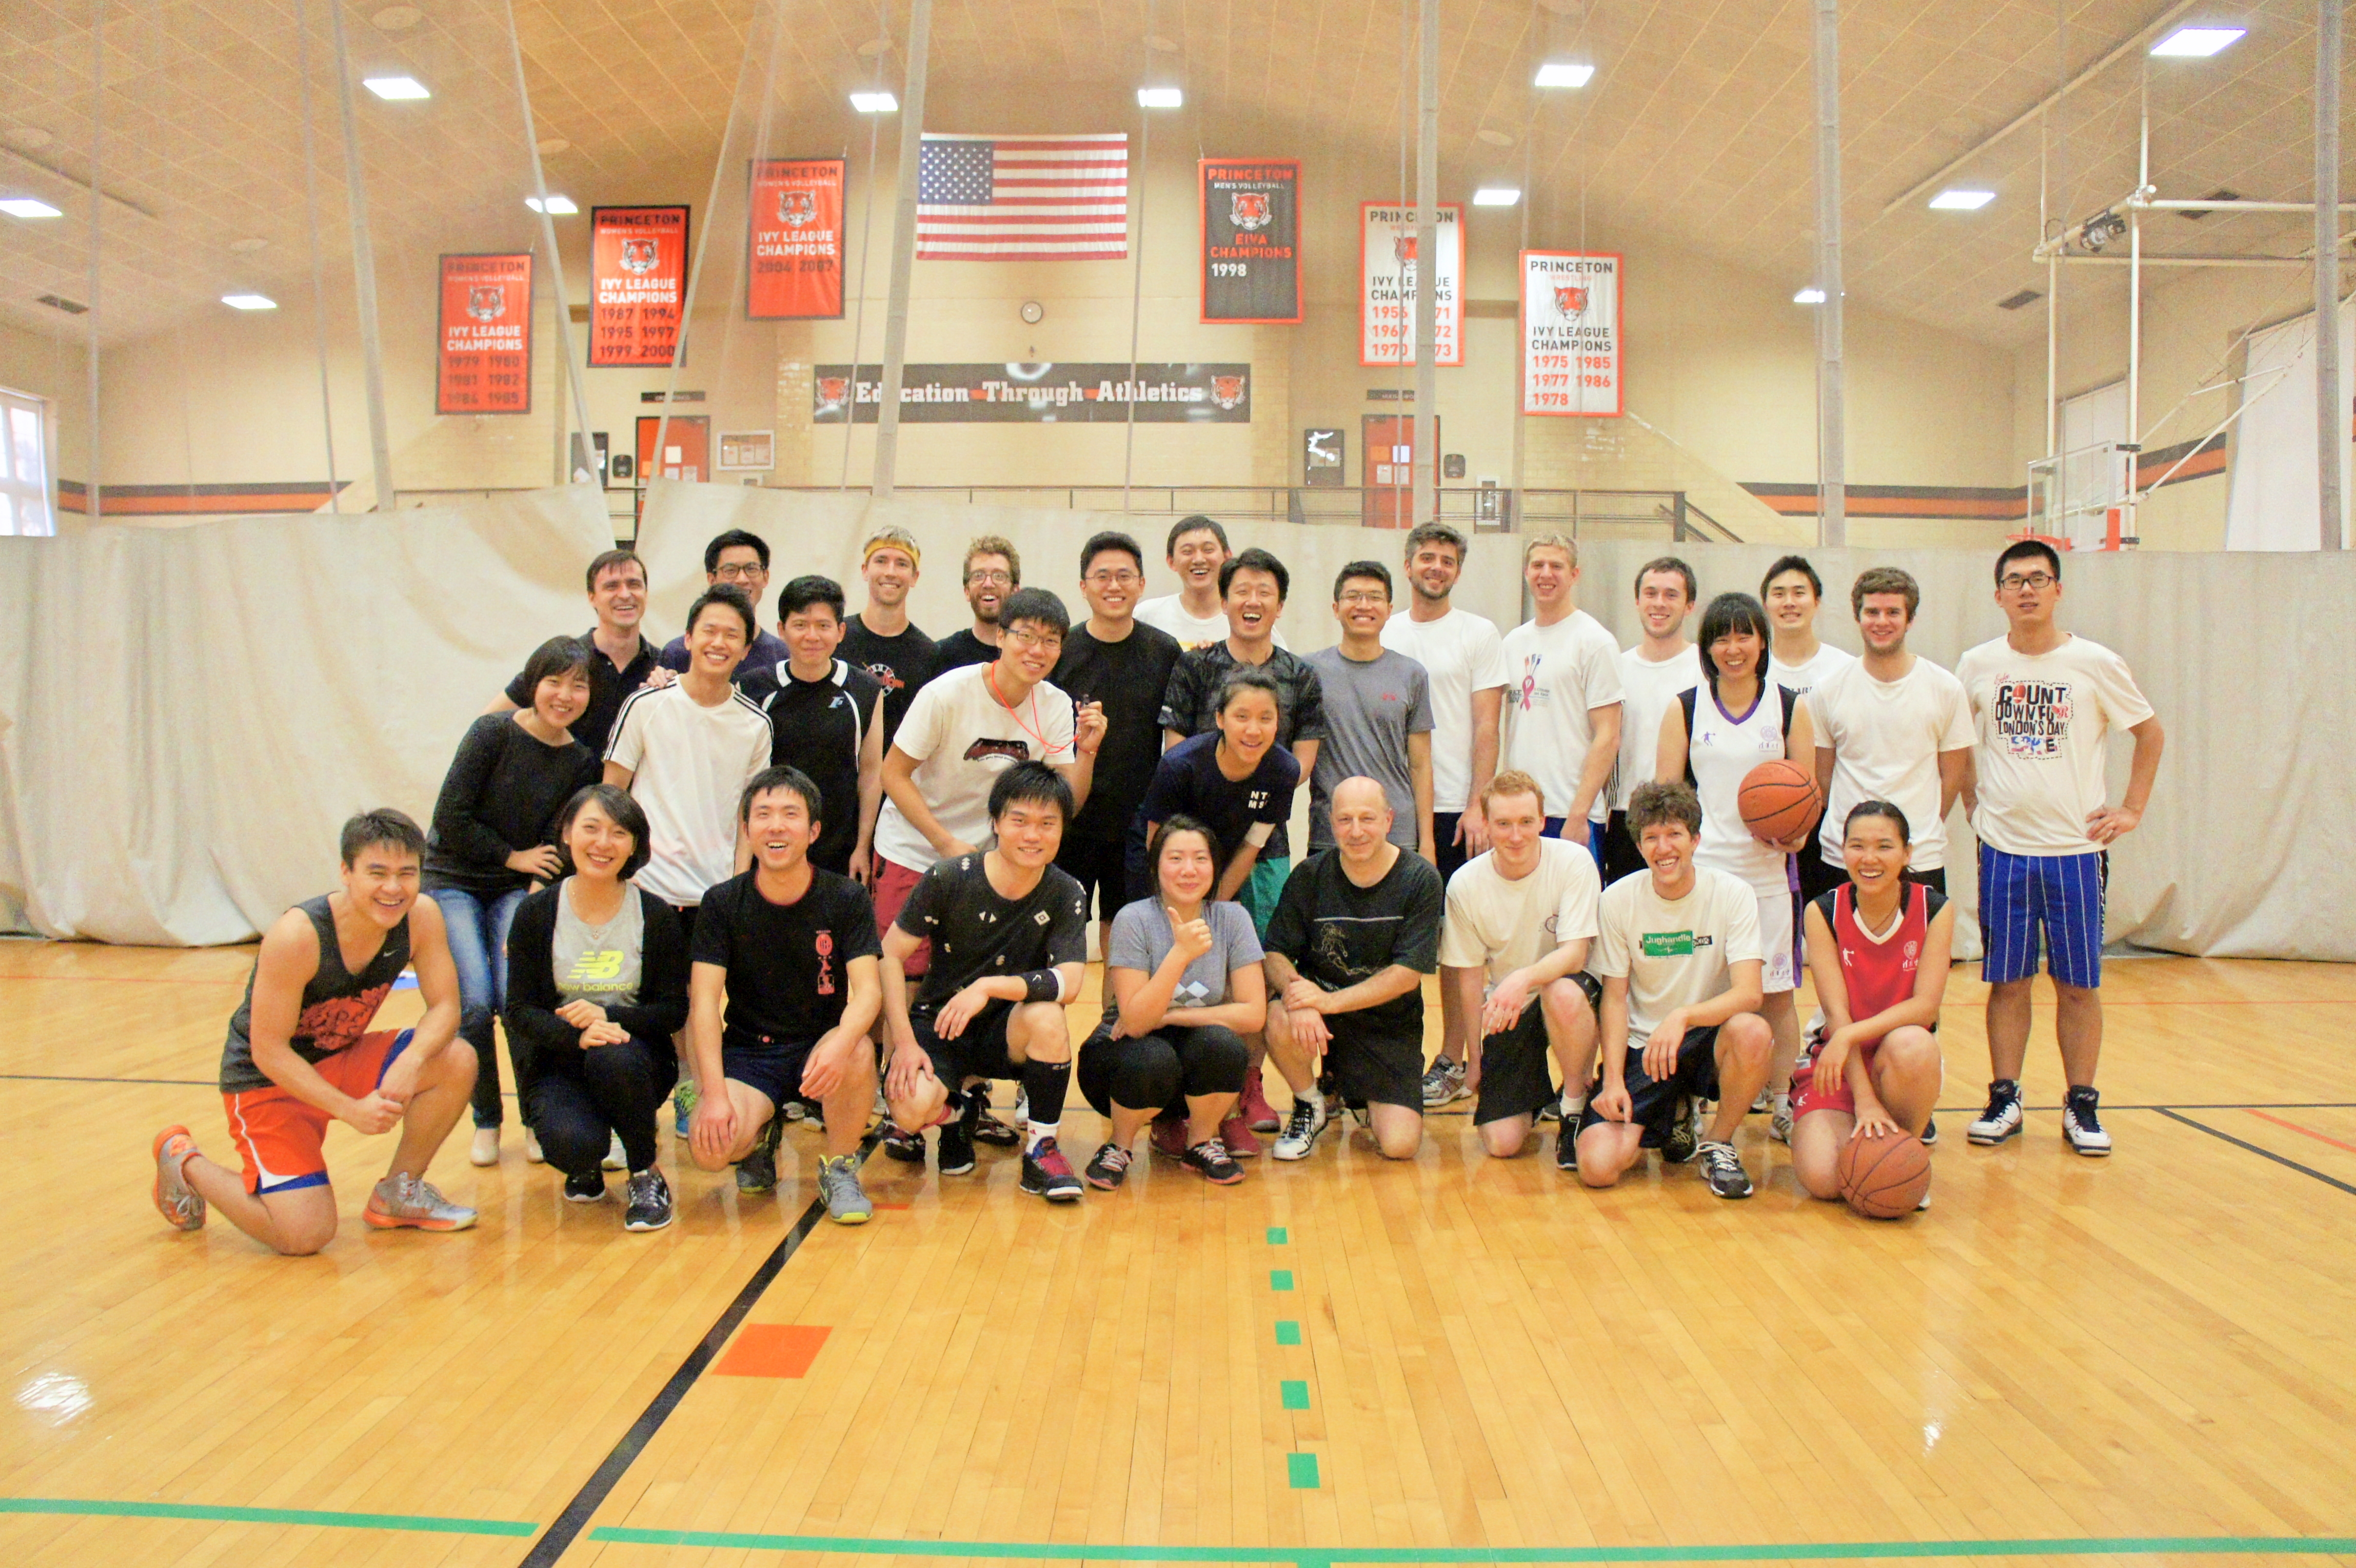 Playing basketball against the Combustion groups! (Spring 2014)